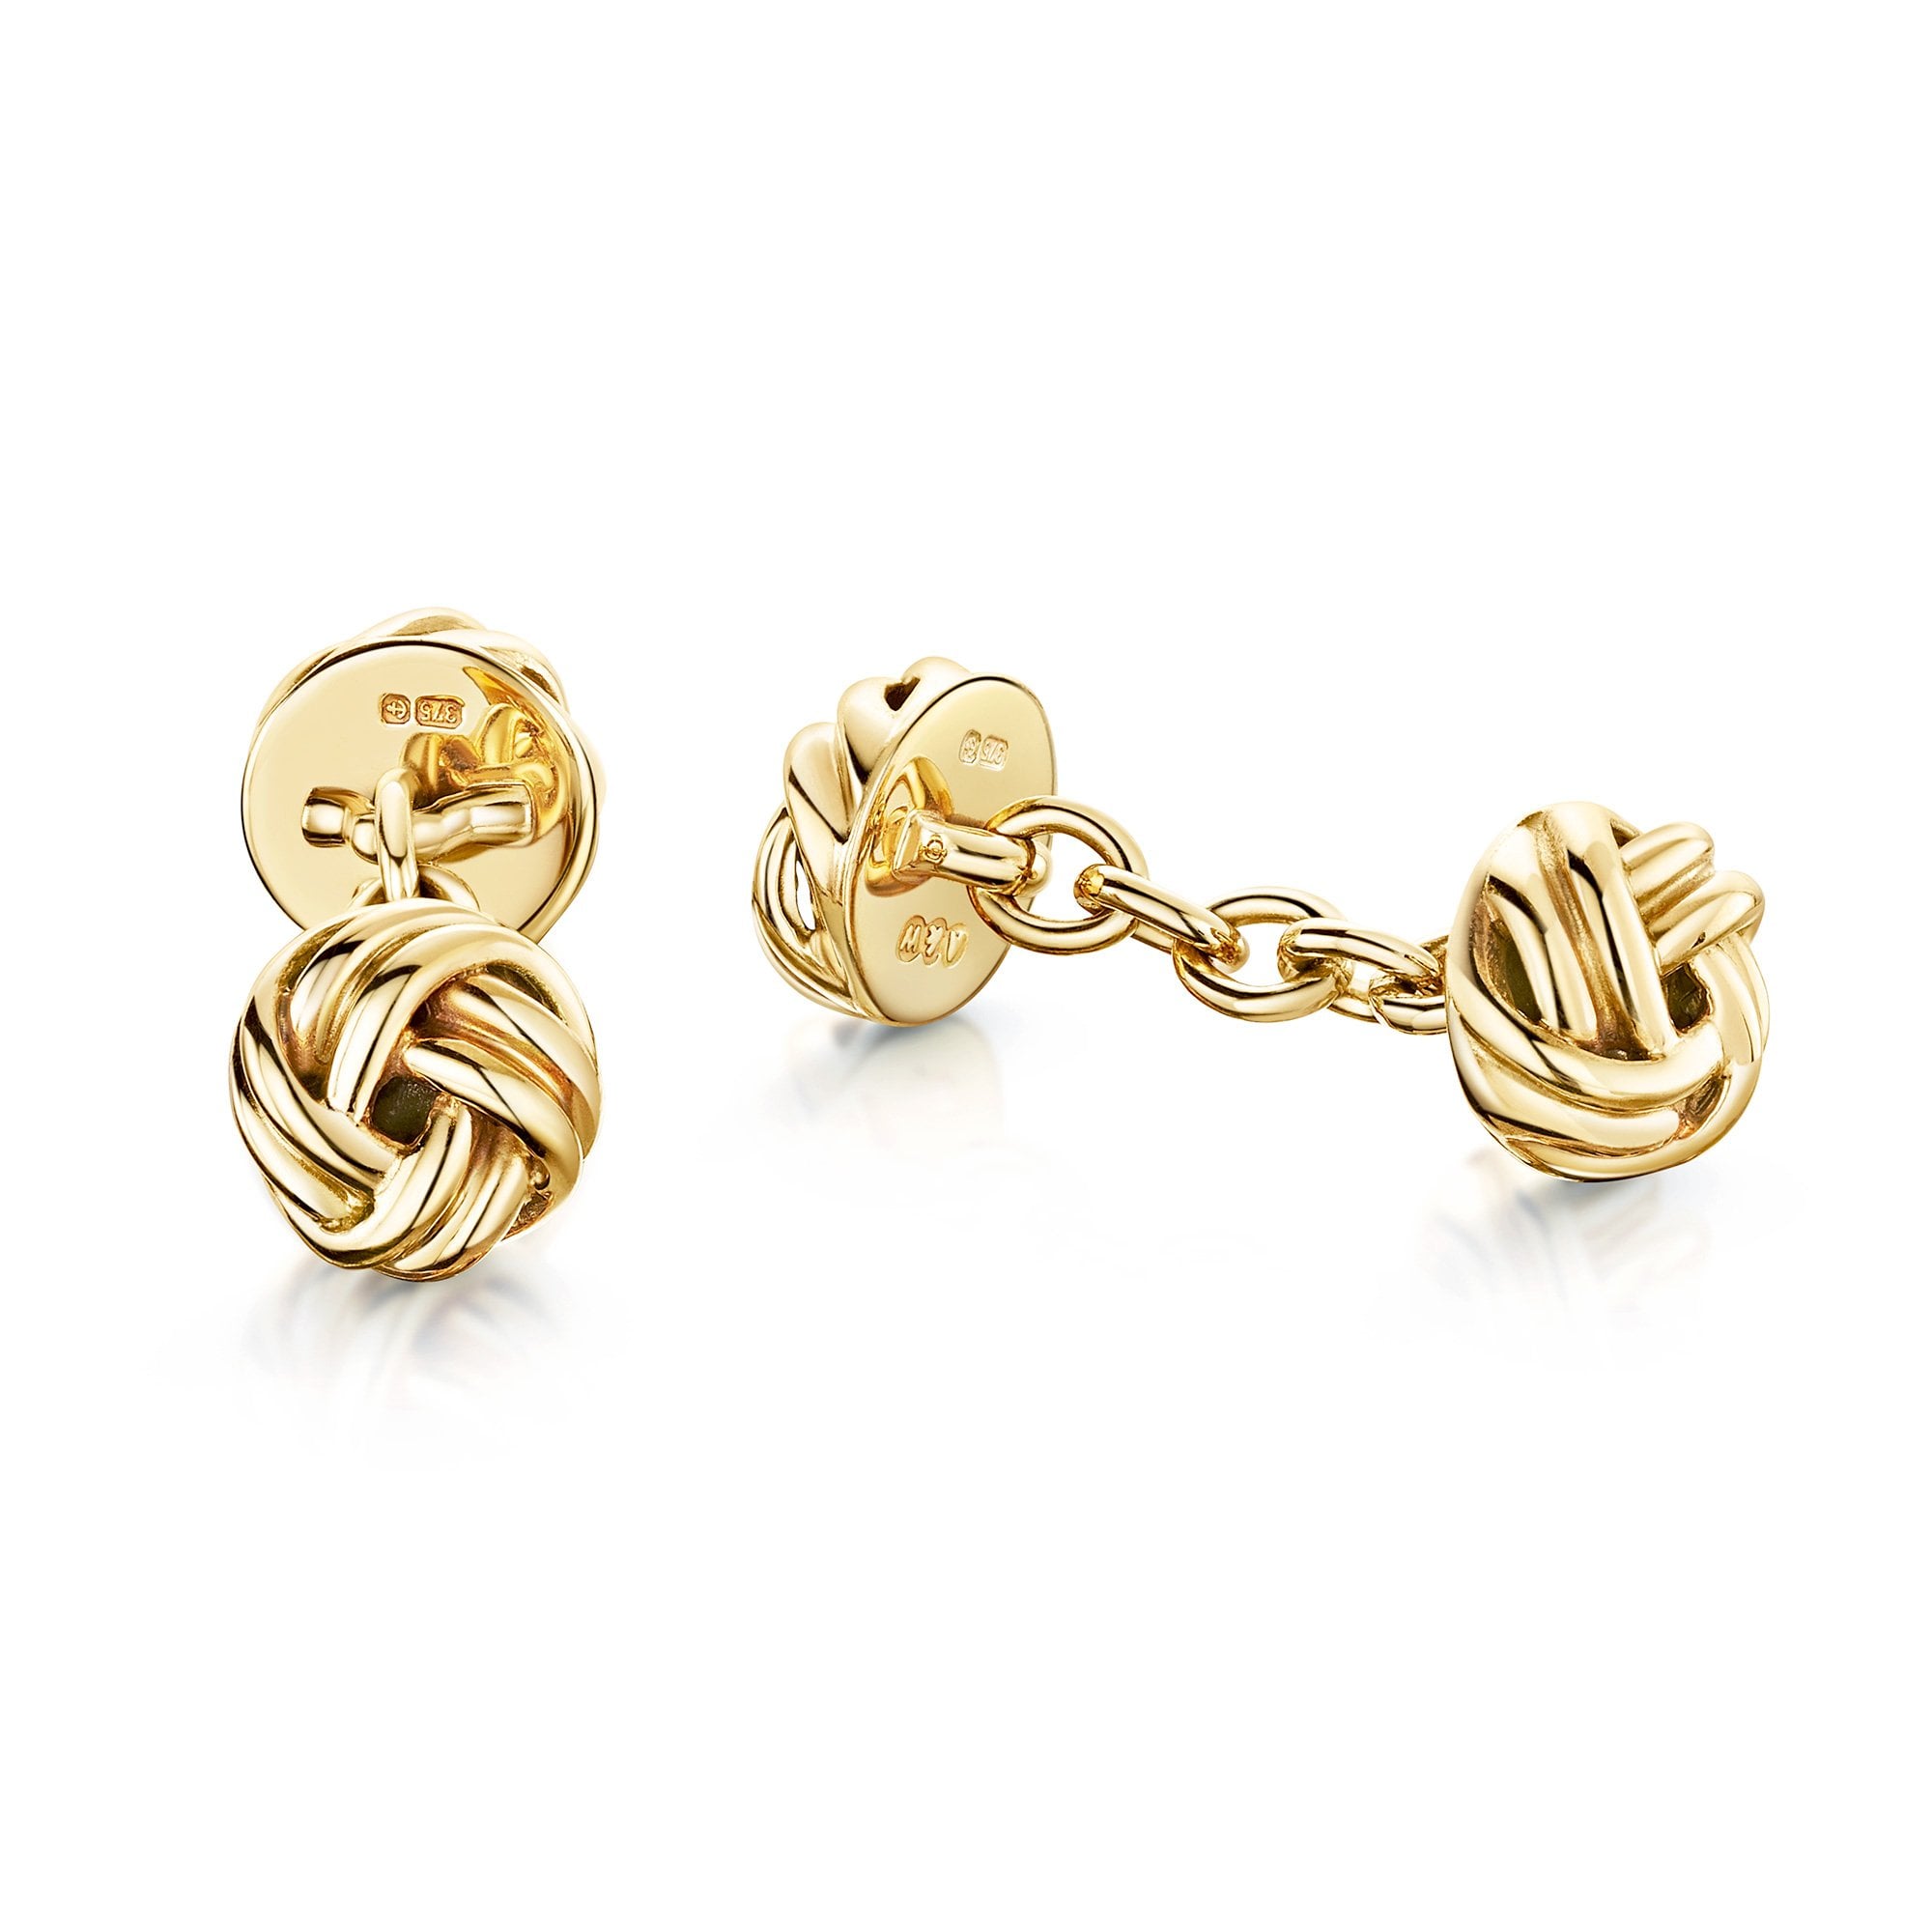 18ct Yellow Gold Polished Knot Cufflinks